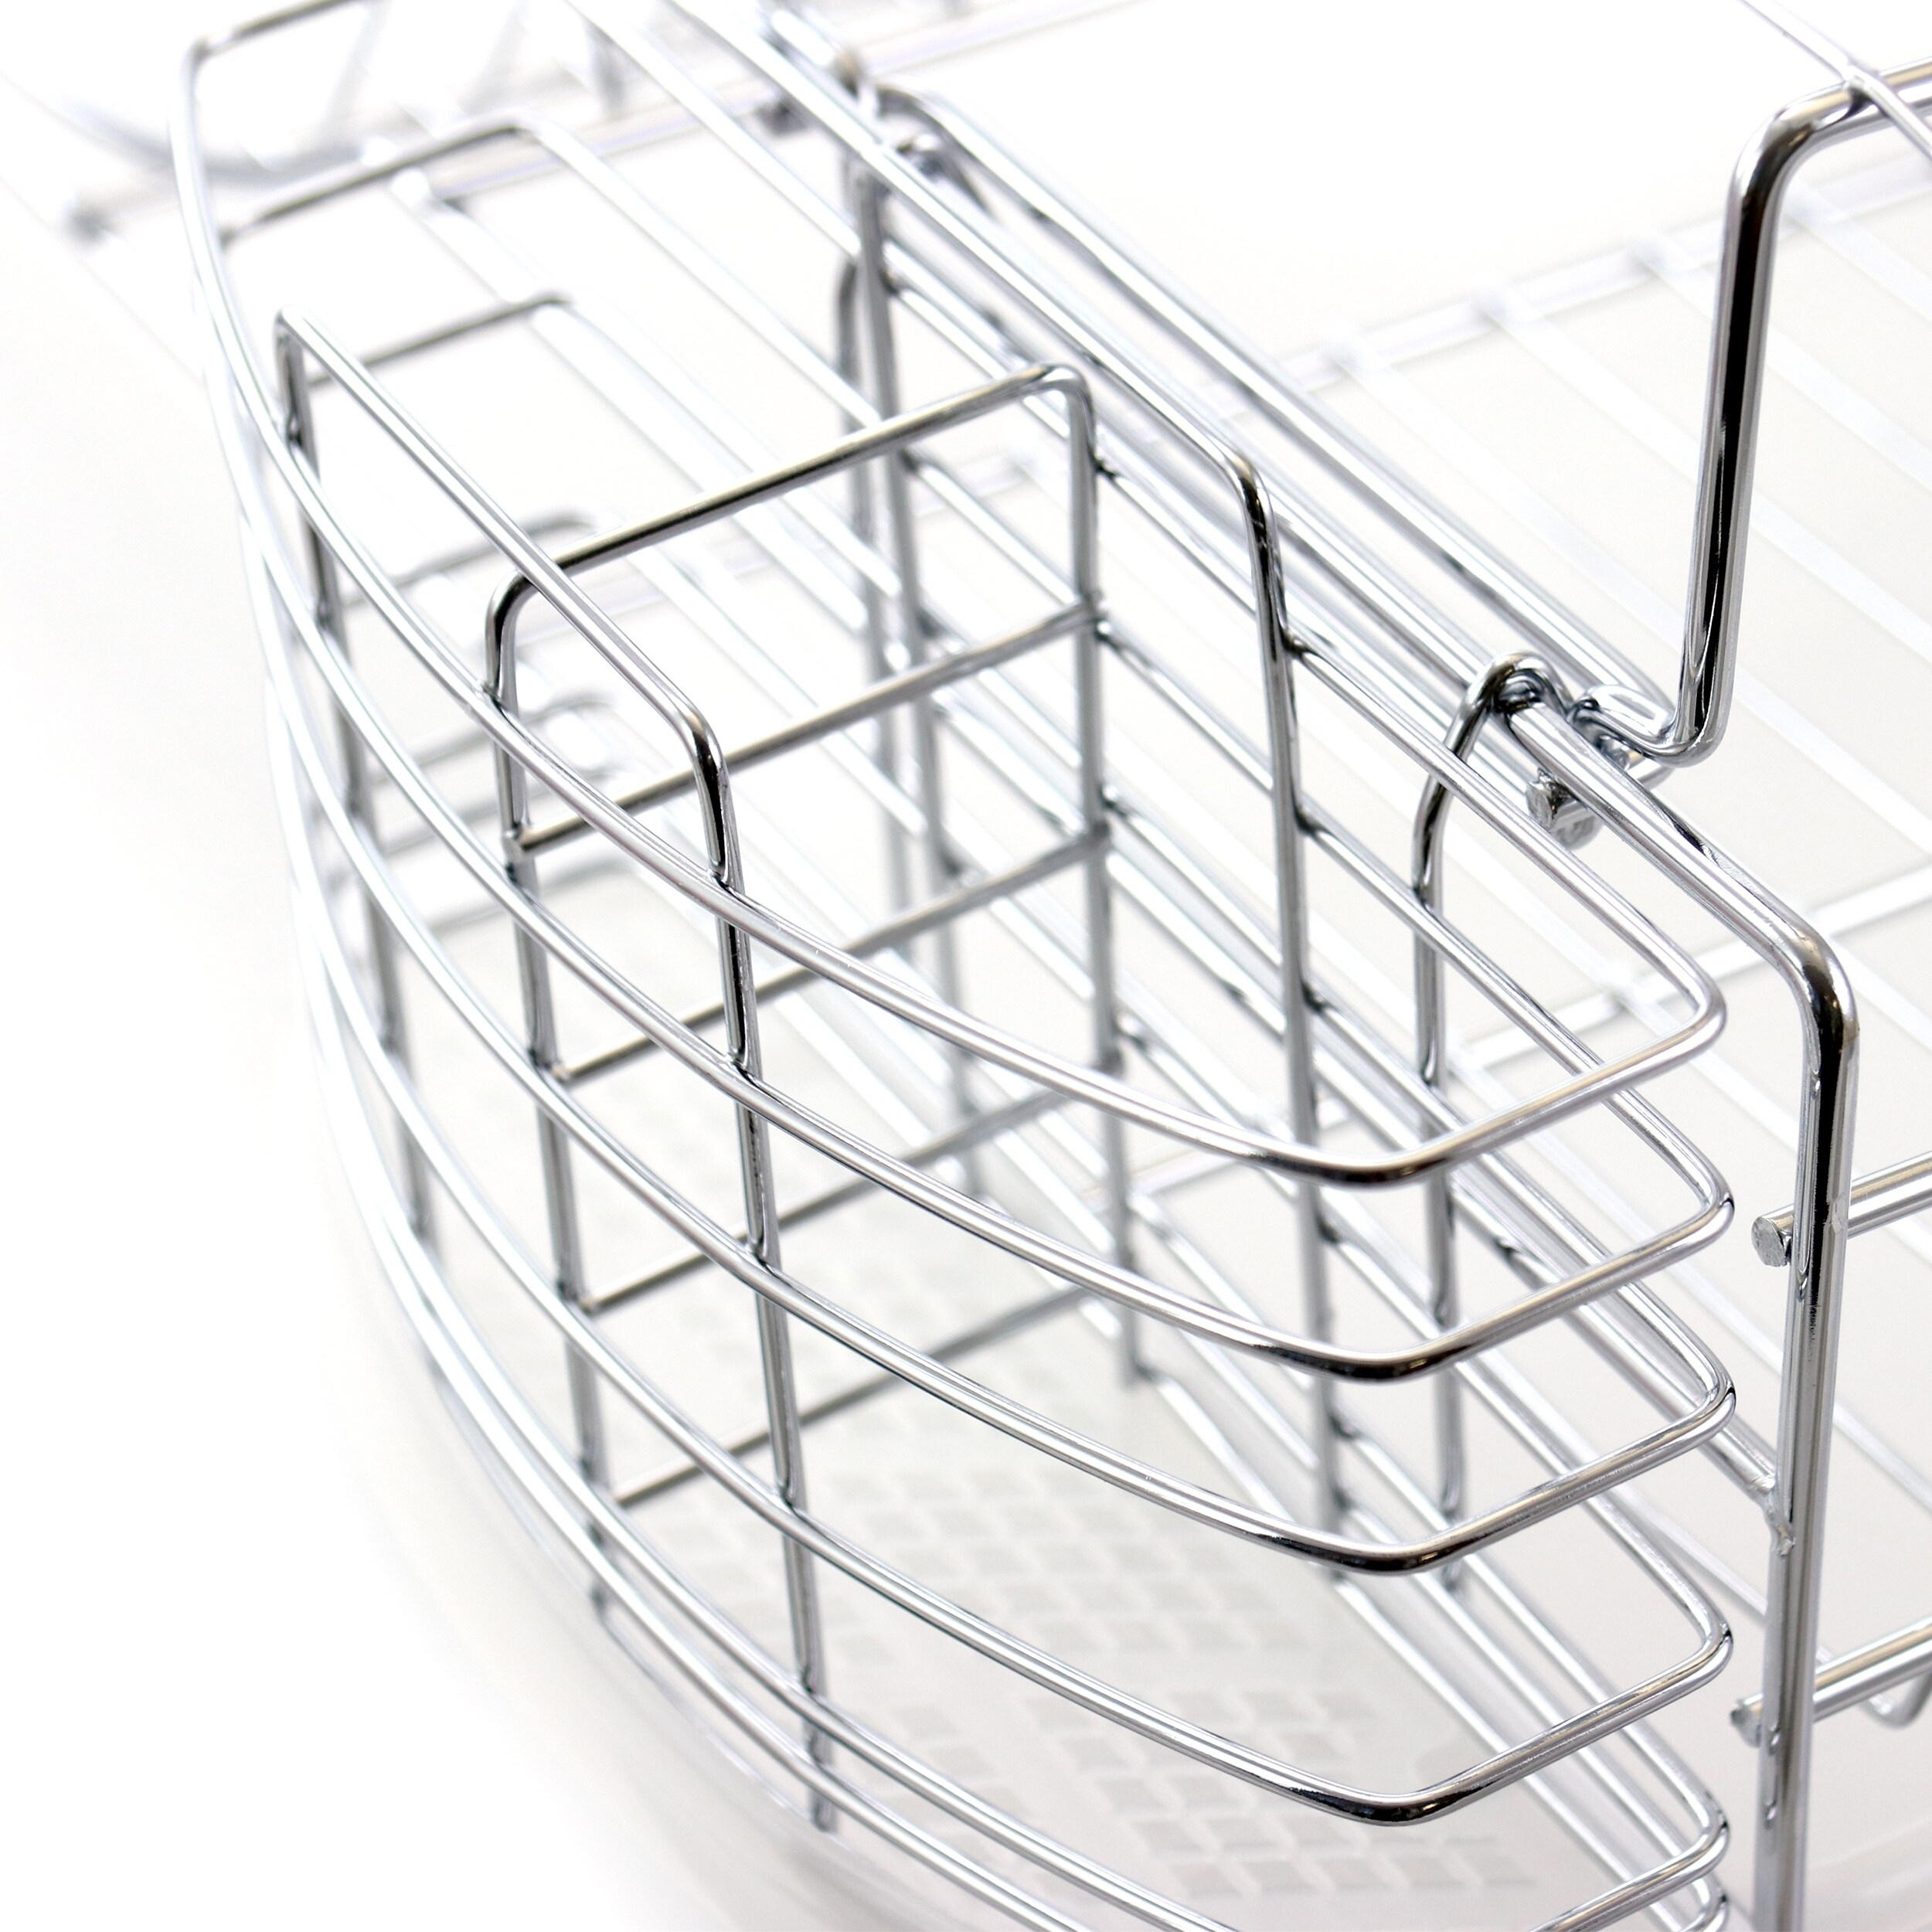 https://ak1.ostkcdn.com/images/products/is/images/direct/7ad269b7eabe44e3bb1f5eb860a77f93e2de3468/Better-Chef-22-inch-Dish-Rack.jpg